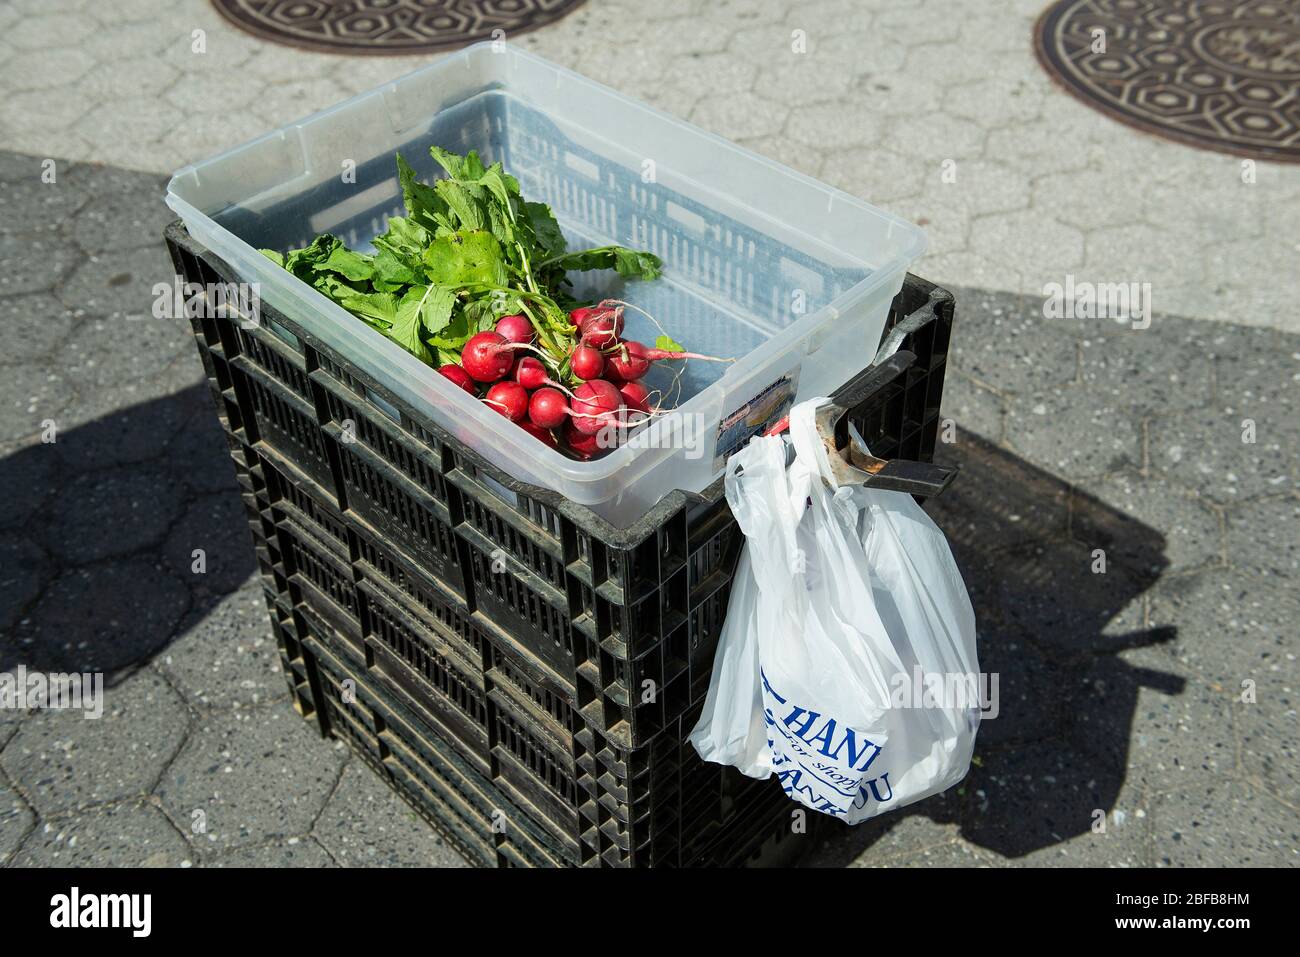 An example of “no contact” shopping at Union Square Farmers Market. The food stand worker placed the produce in the bin for the purchaser to pick up. Stock Photo